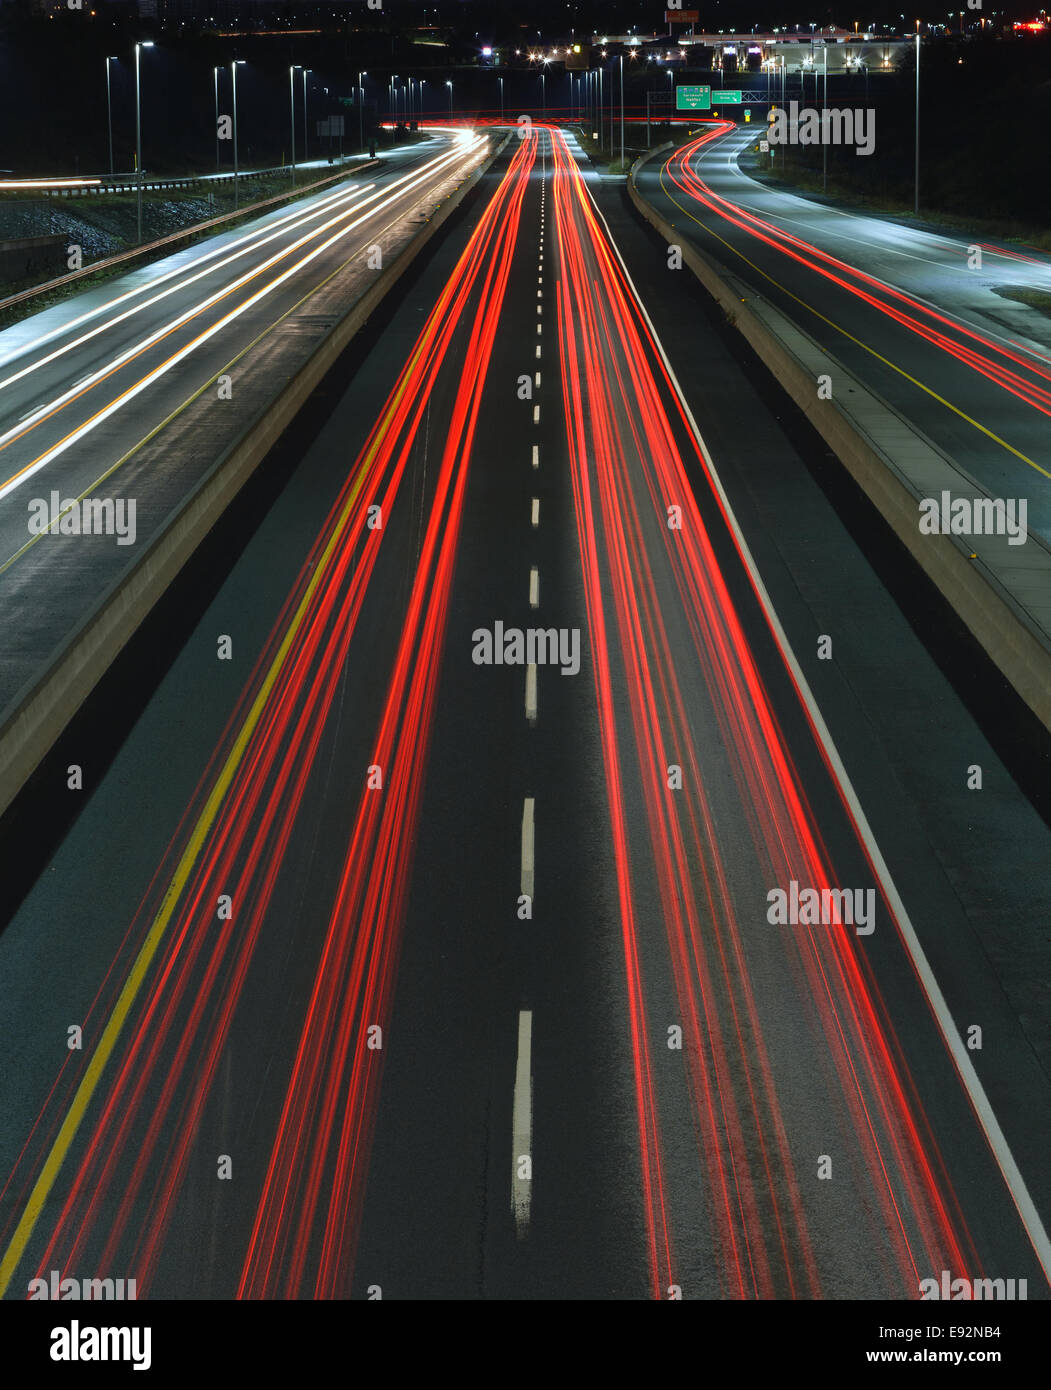 Car trails on a busy highway at night. Stock Photo